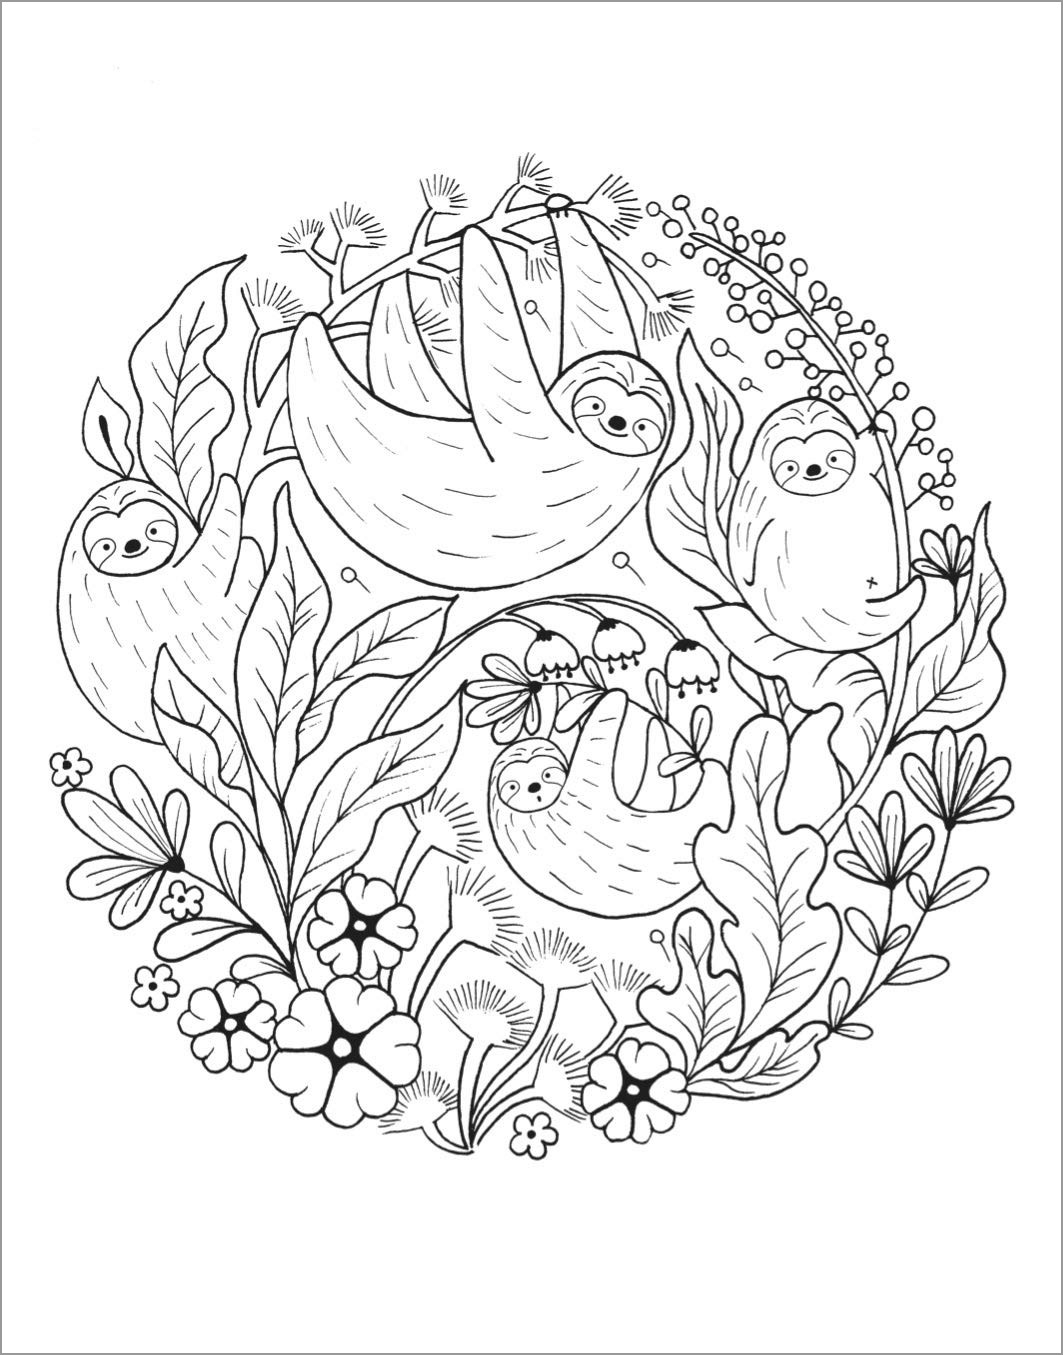 Printable Sloths Coloring Page for Adult   ColoringBay